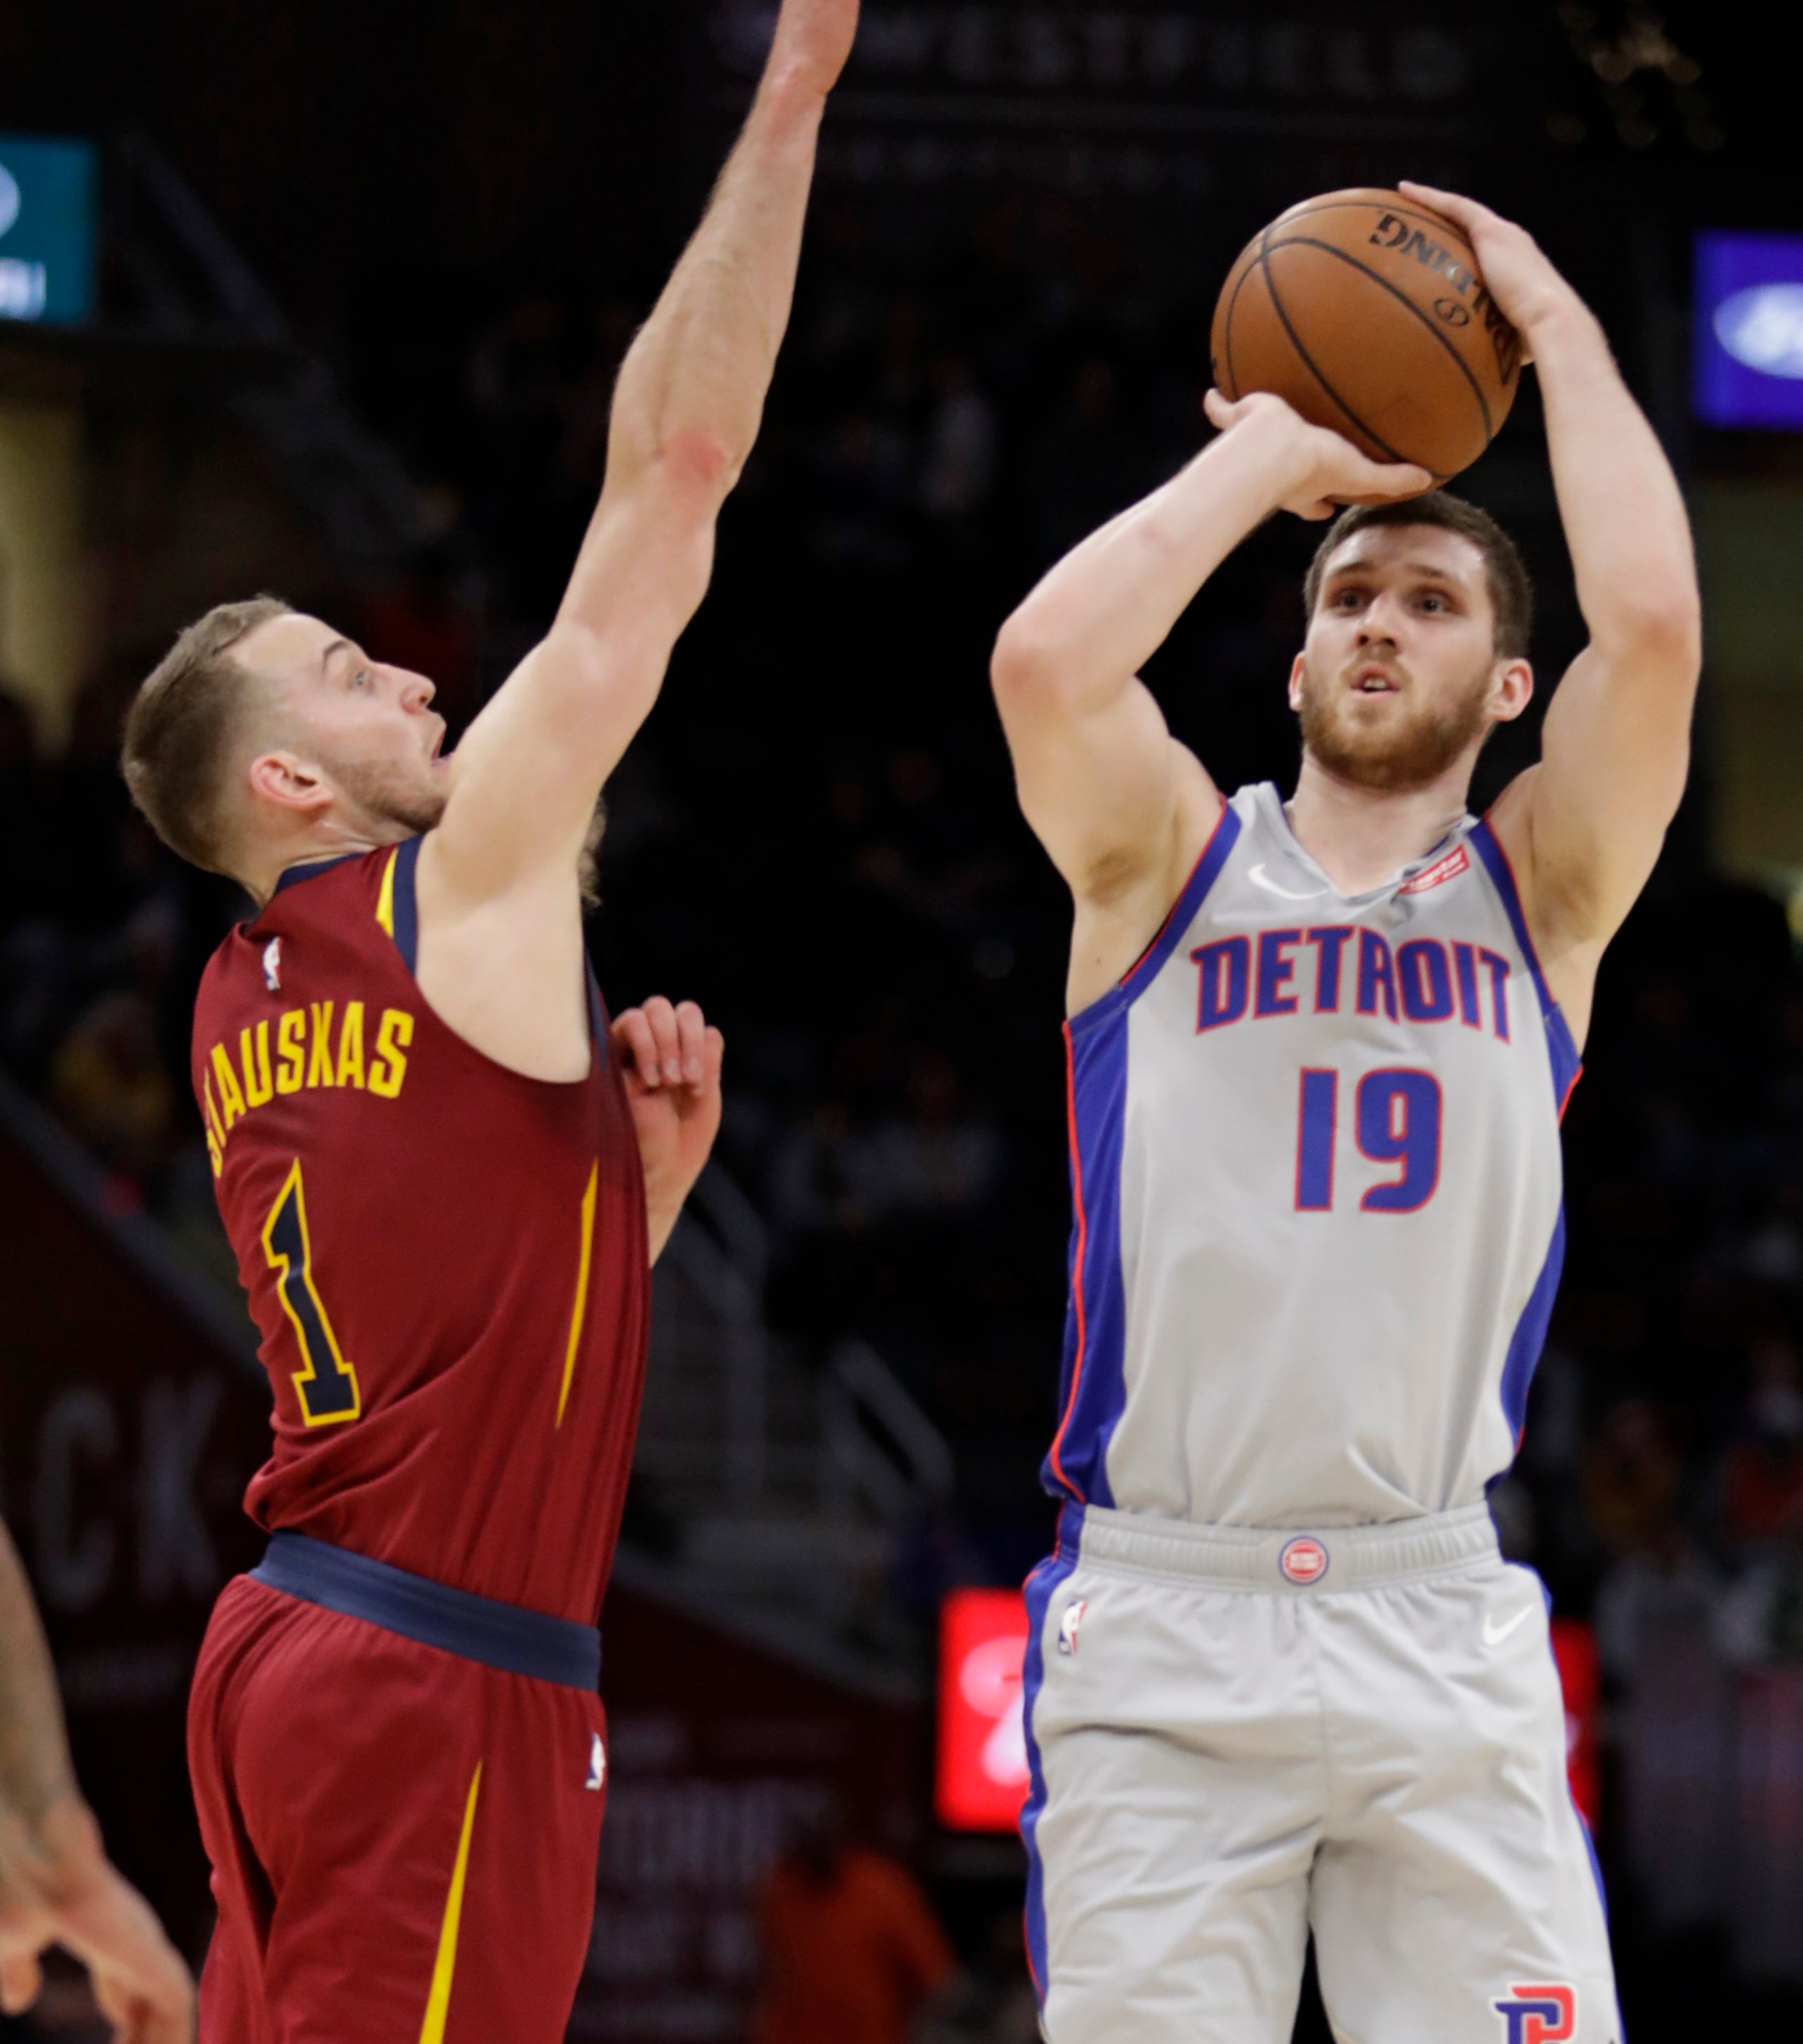 12. SG Svi Mykhailiuk, age 22: He had a good Summer League performance but still is waiting to get the regular-season playing time to show what he can do. He’s been in a logjam behind the other wings in the playing rotation and until he gets regular minutes, he’ll be mostly potential rather than actual value. He’s on a value contract so if the Pistons were to make a big trade, they’d think twice about including him.